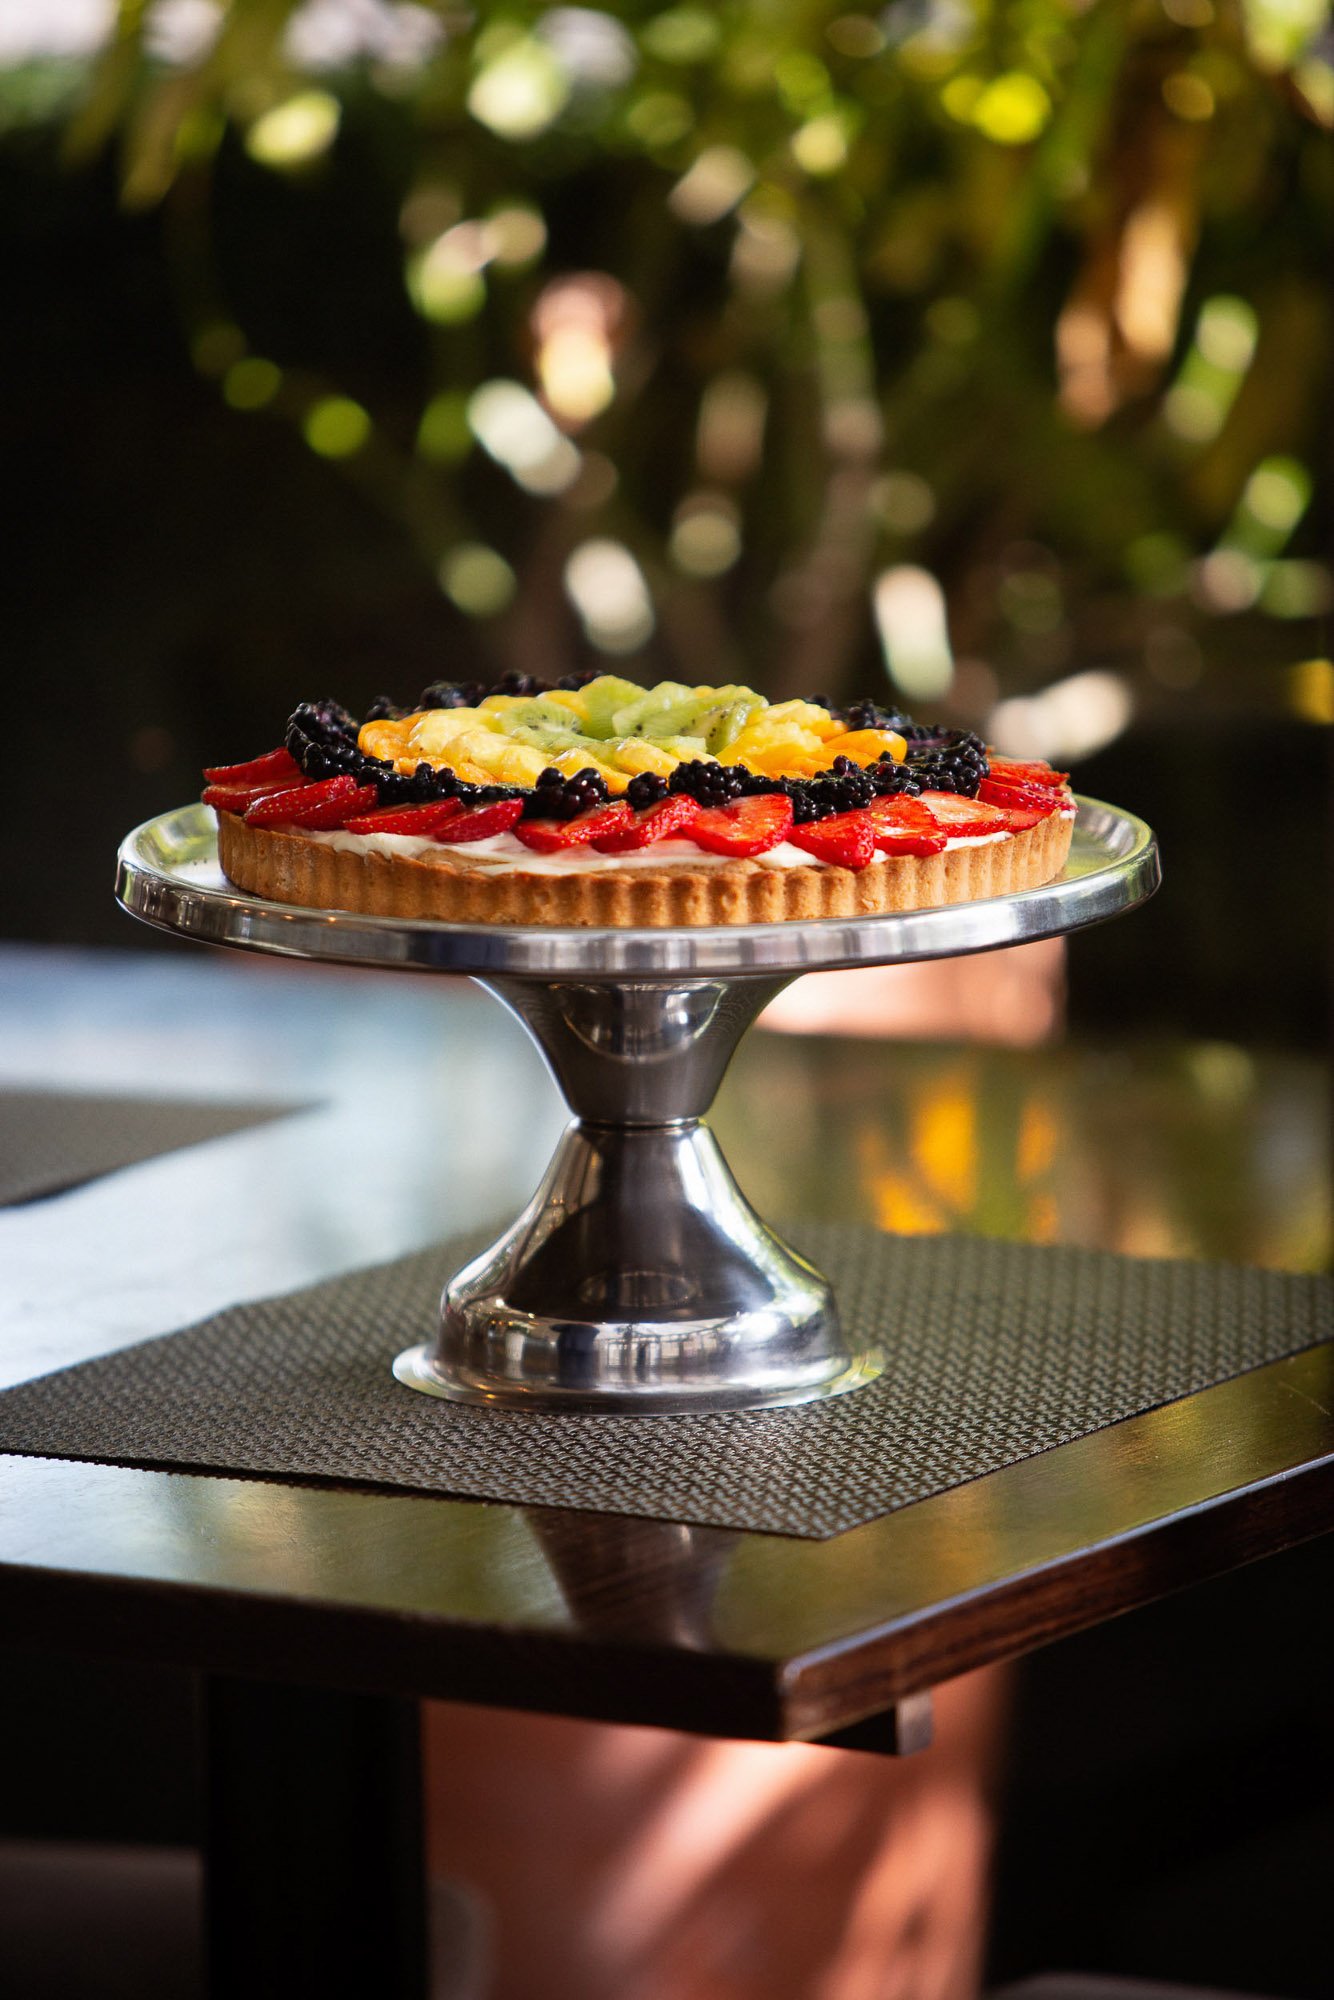 Fruit tart on a dispaly stand.jpg